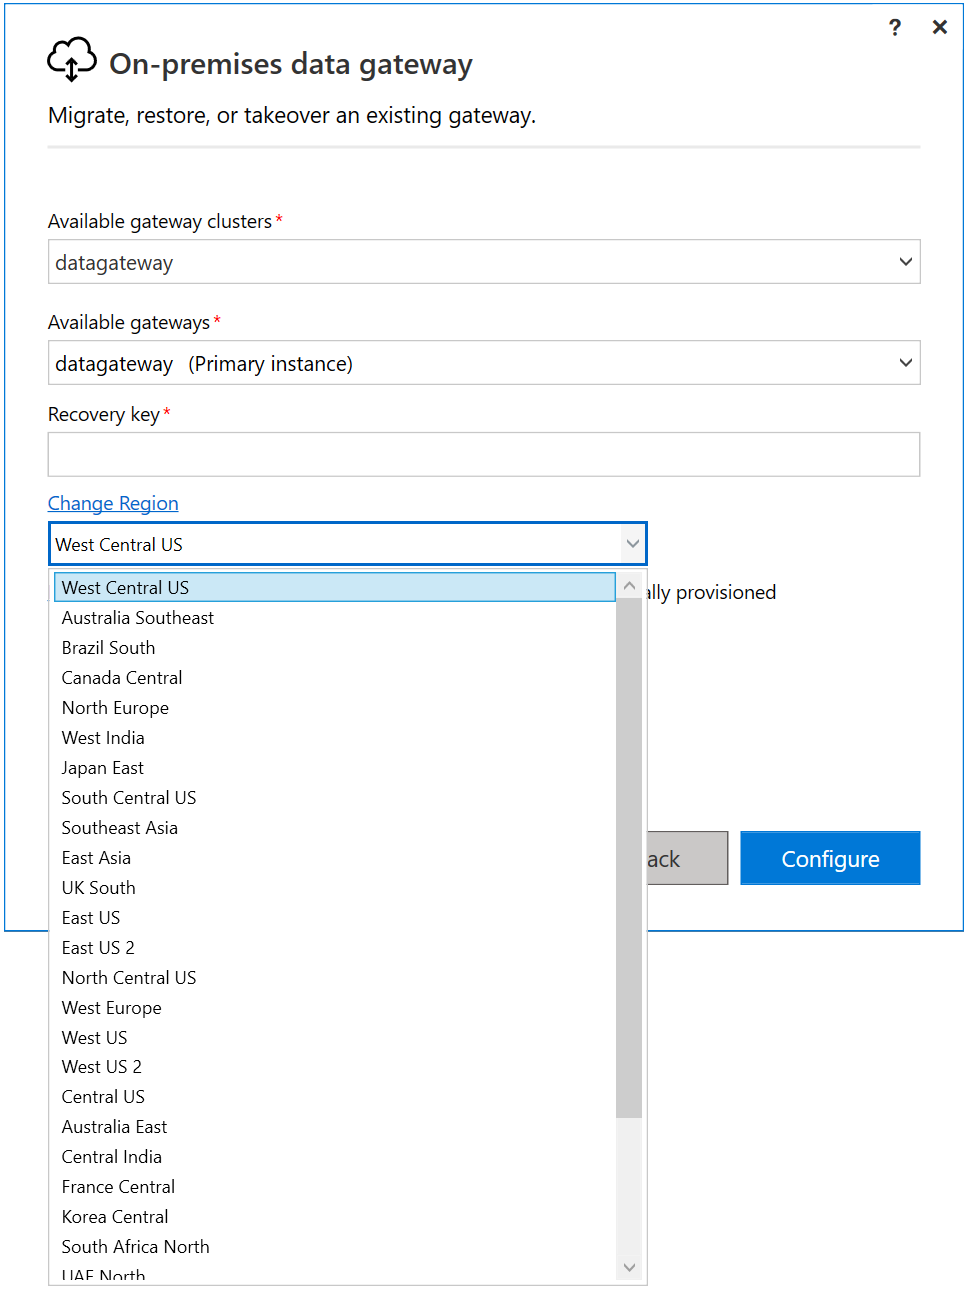 Screenshot of the Migrate, restore, or takeover an existing gateway page with the change region menu displayed with West Central US selected.